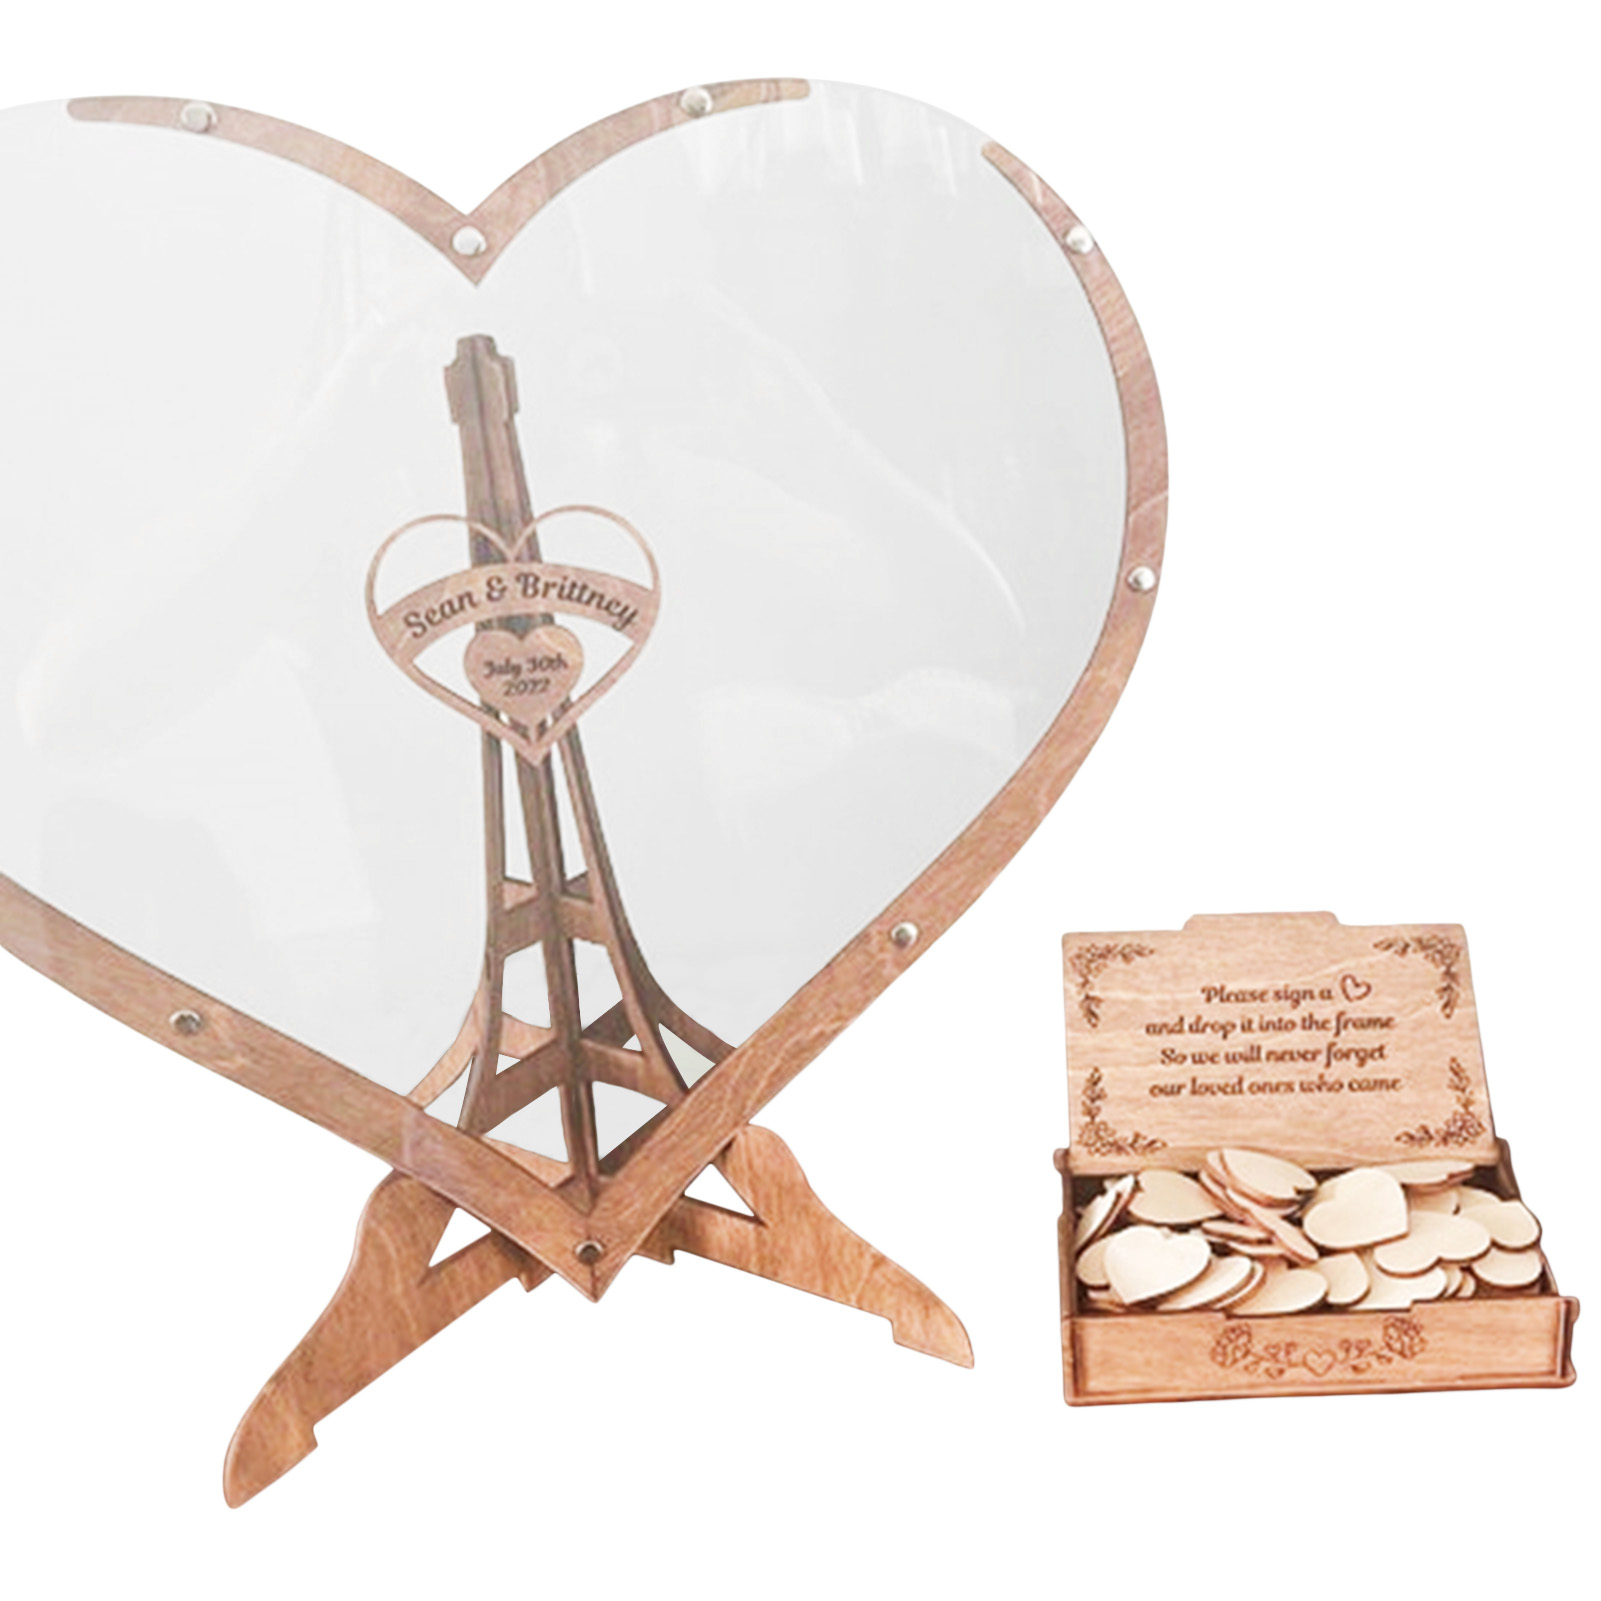 Wooden Heart-shaped Guest Drop Box Wedding Message Box Gift With 60 Small Wooden Hearts Box Anniversary Signature Guest Books